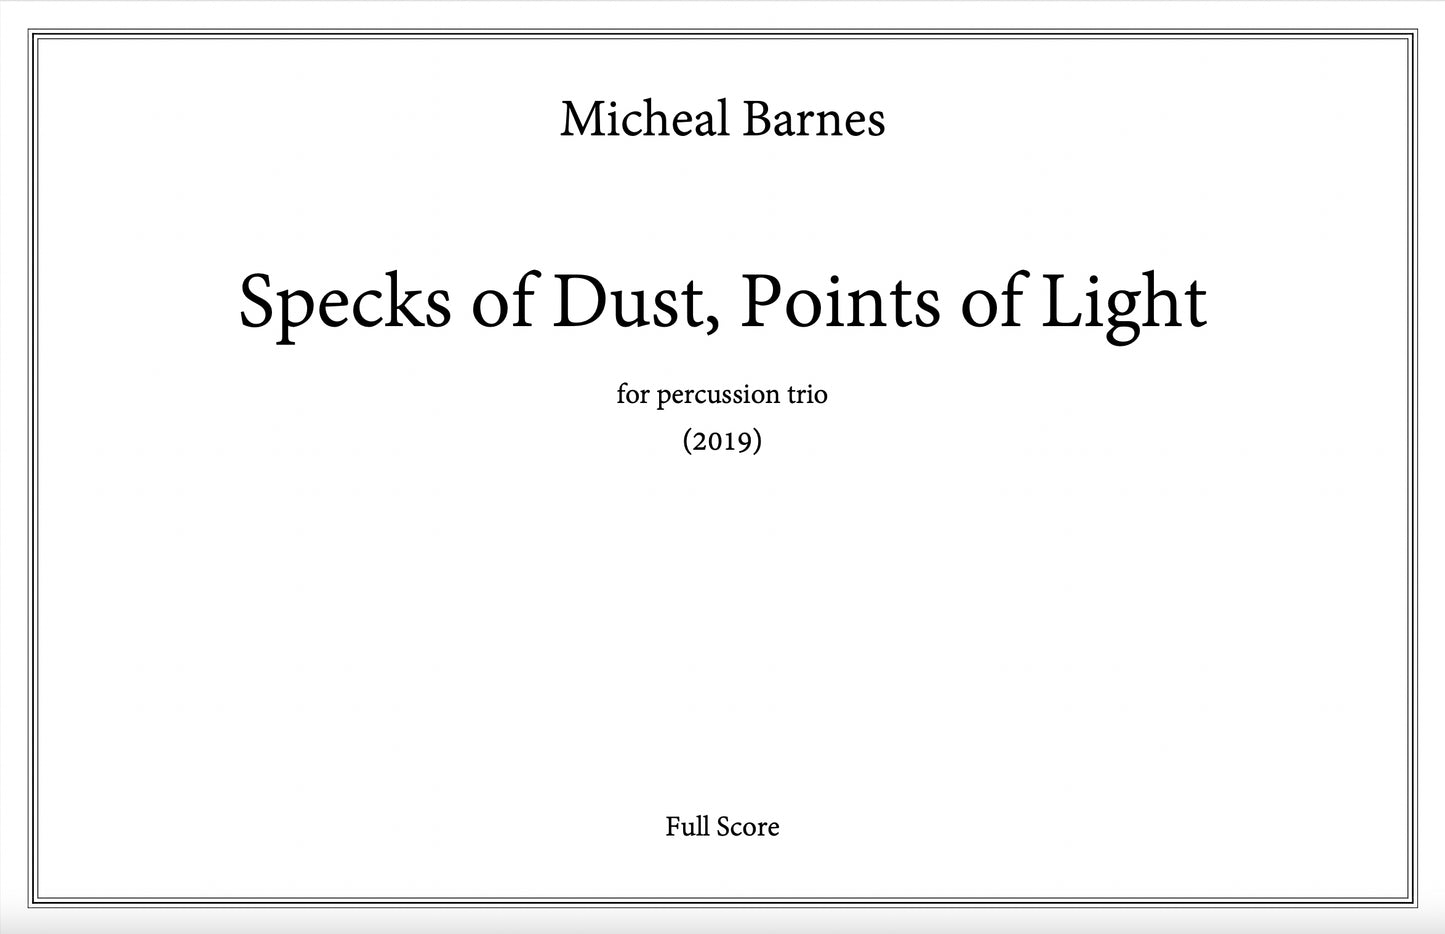 Specks of Dust, Points of Light by Micheal Barnes